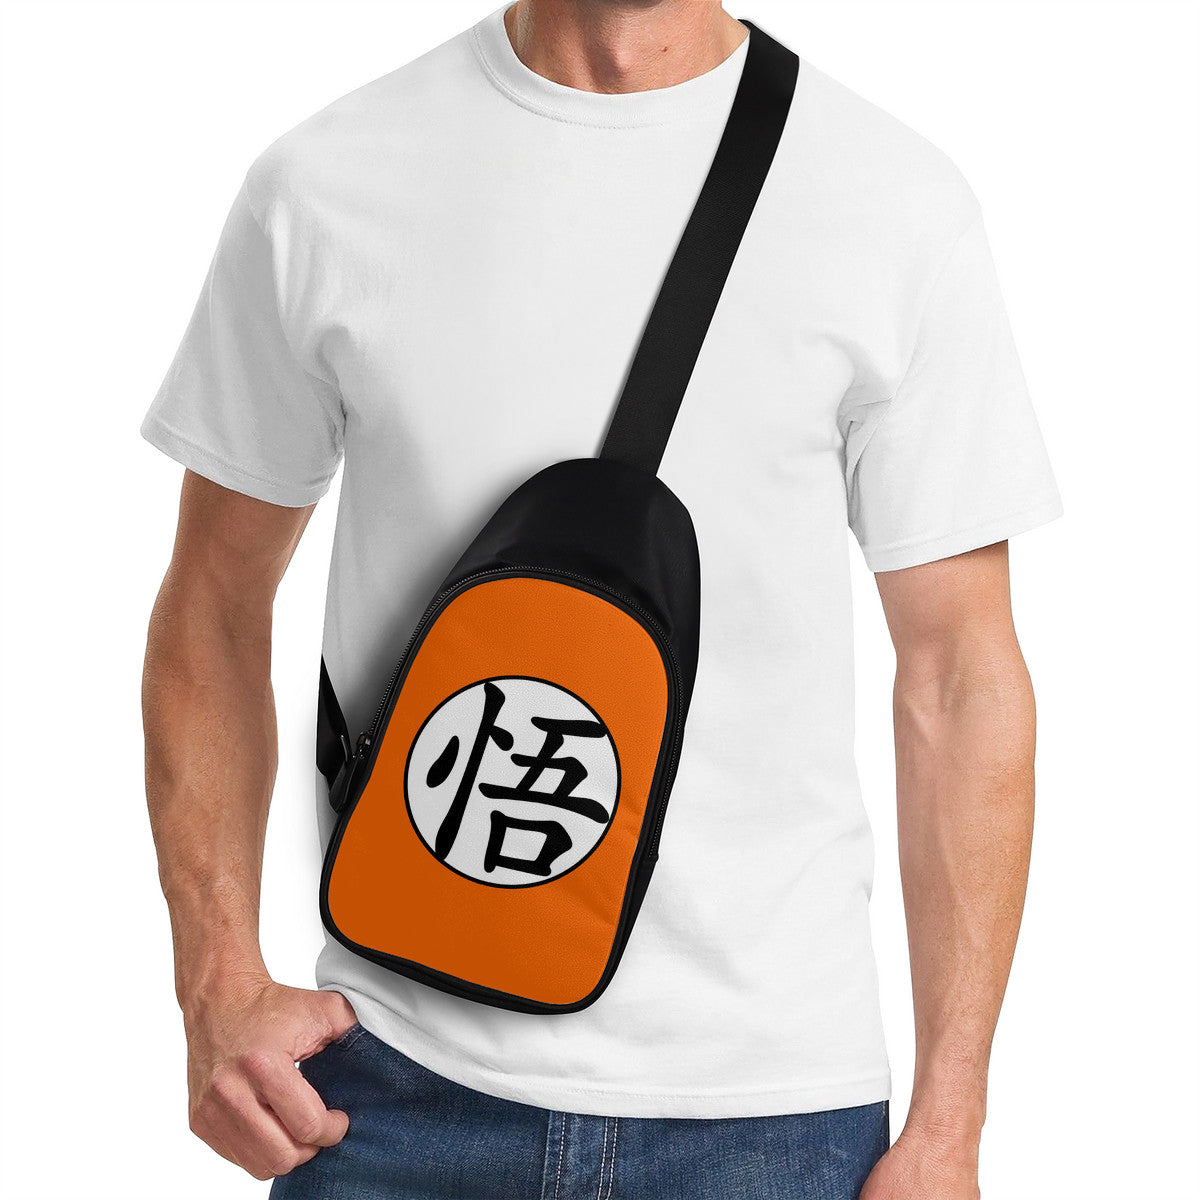 The Dragon Ball Chest Bag - Orange worn by male model view